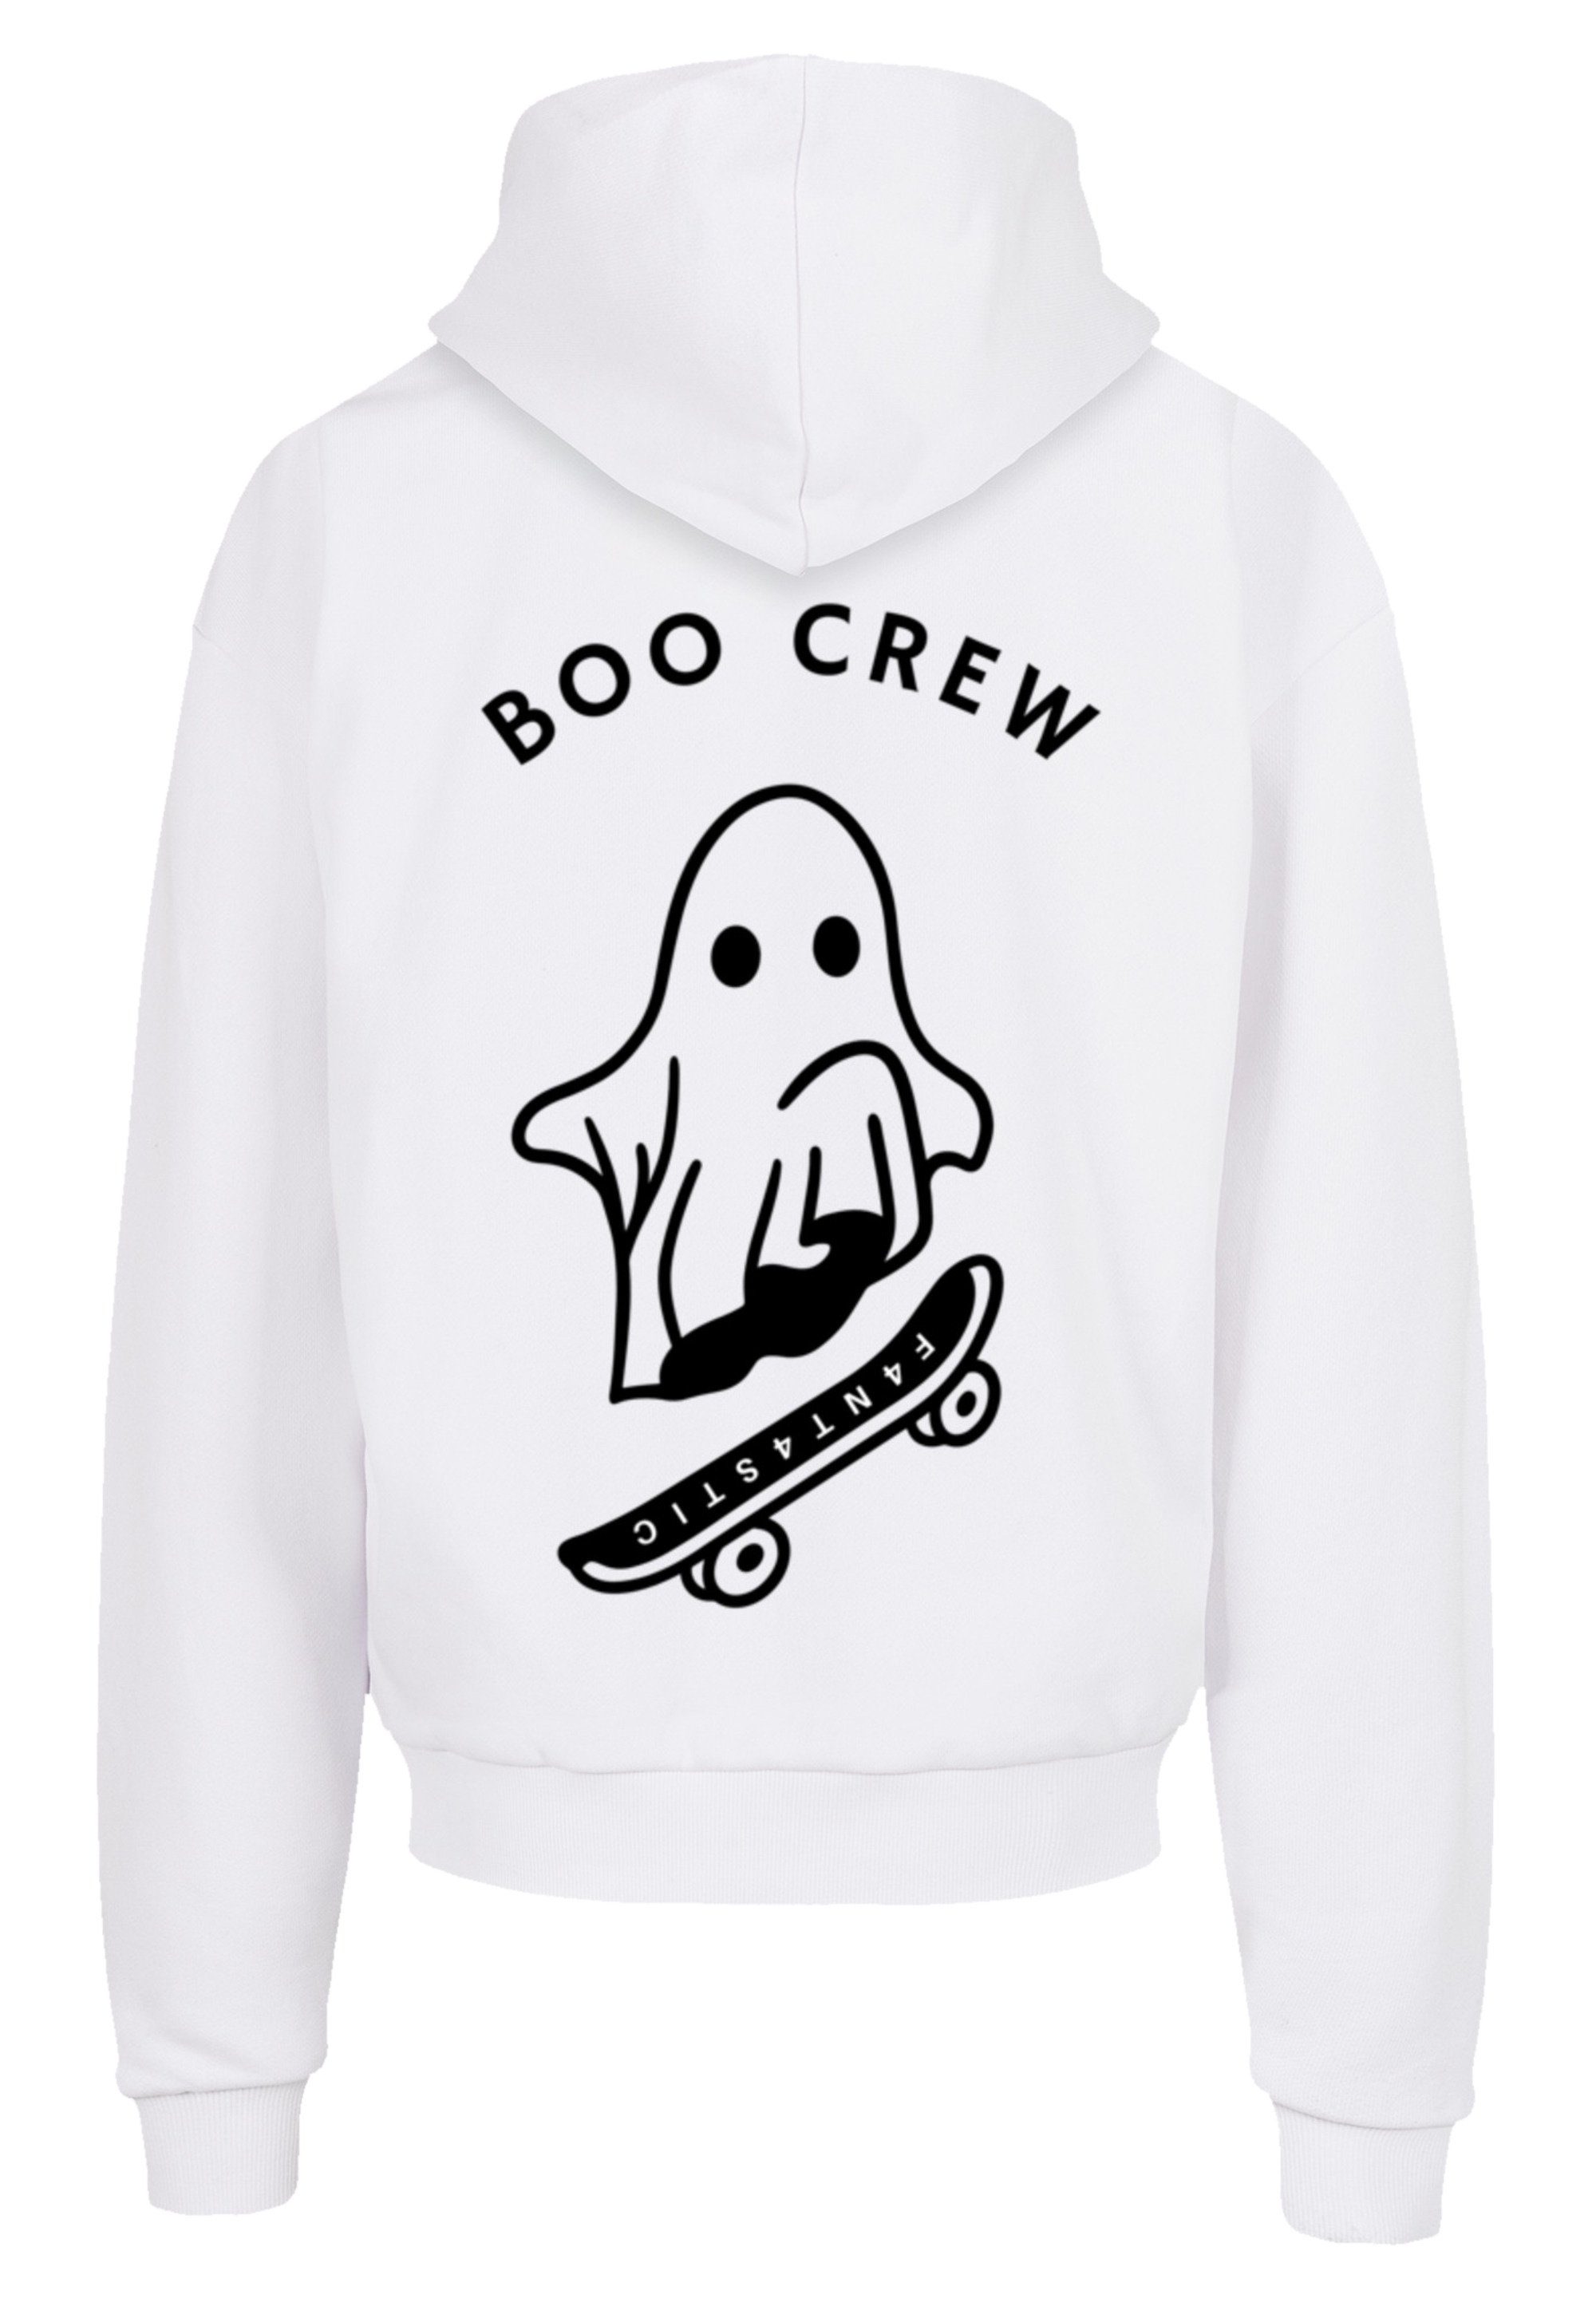 Crew Halloween-Vibes dein Hoodie Outfit Spooky für Boo F4NT4STIC Print, Halloween